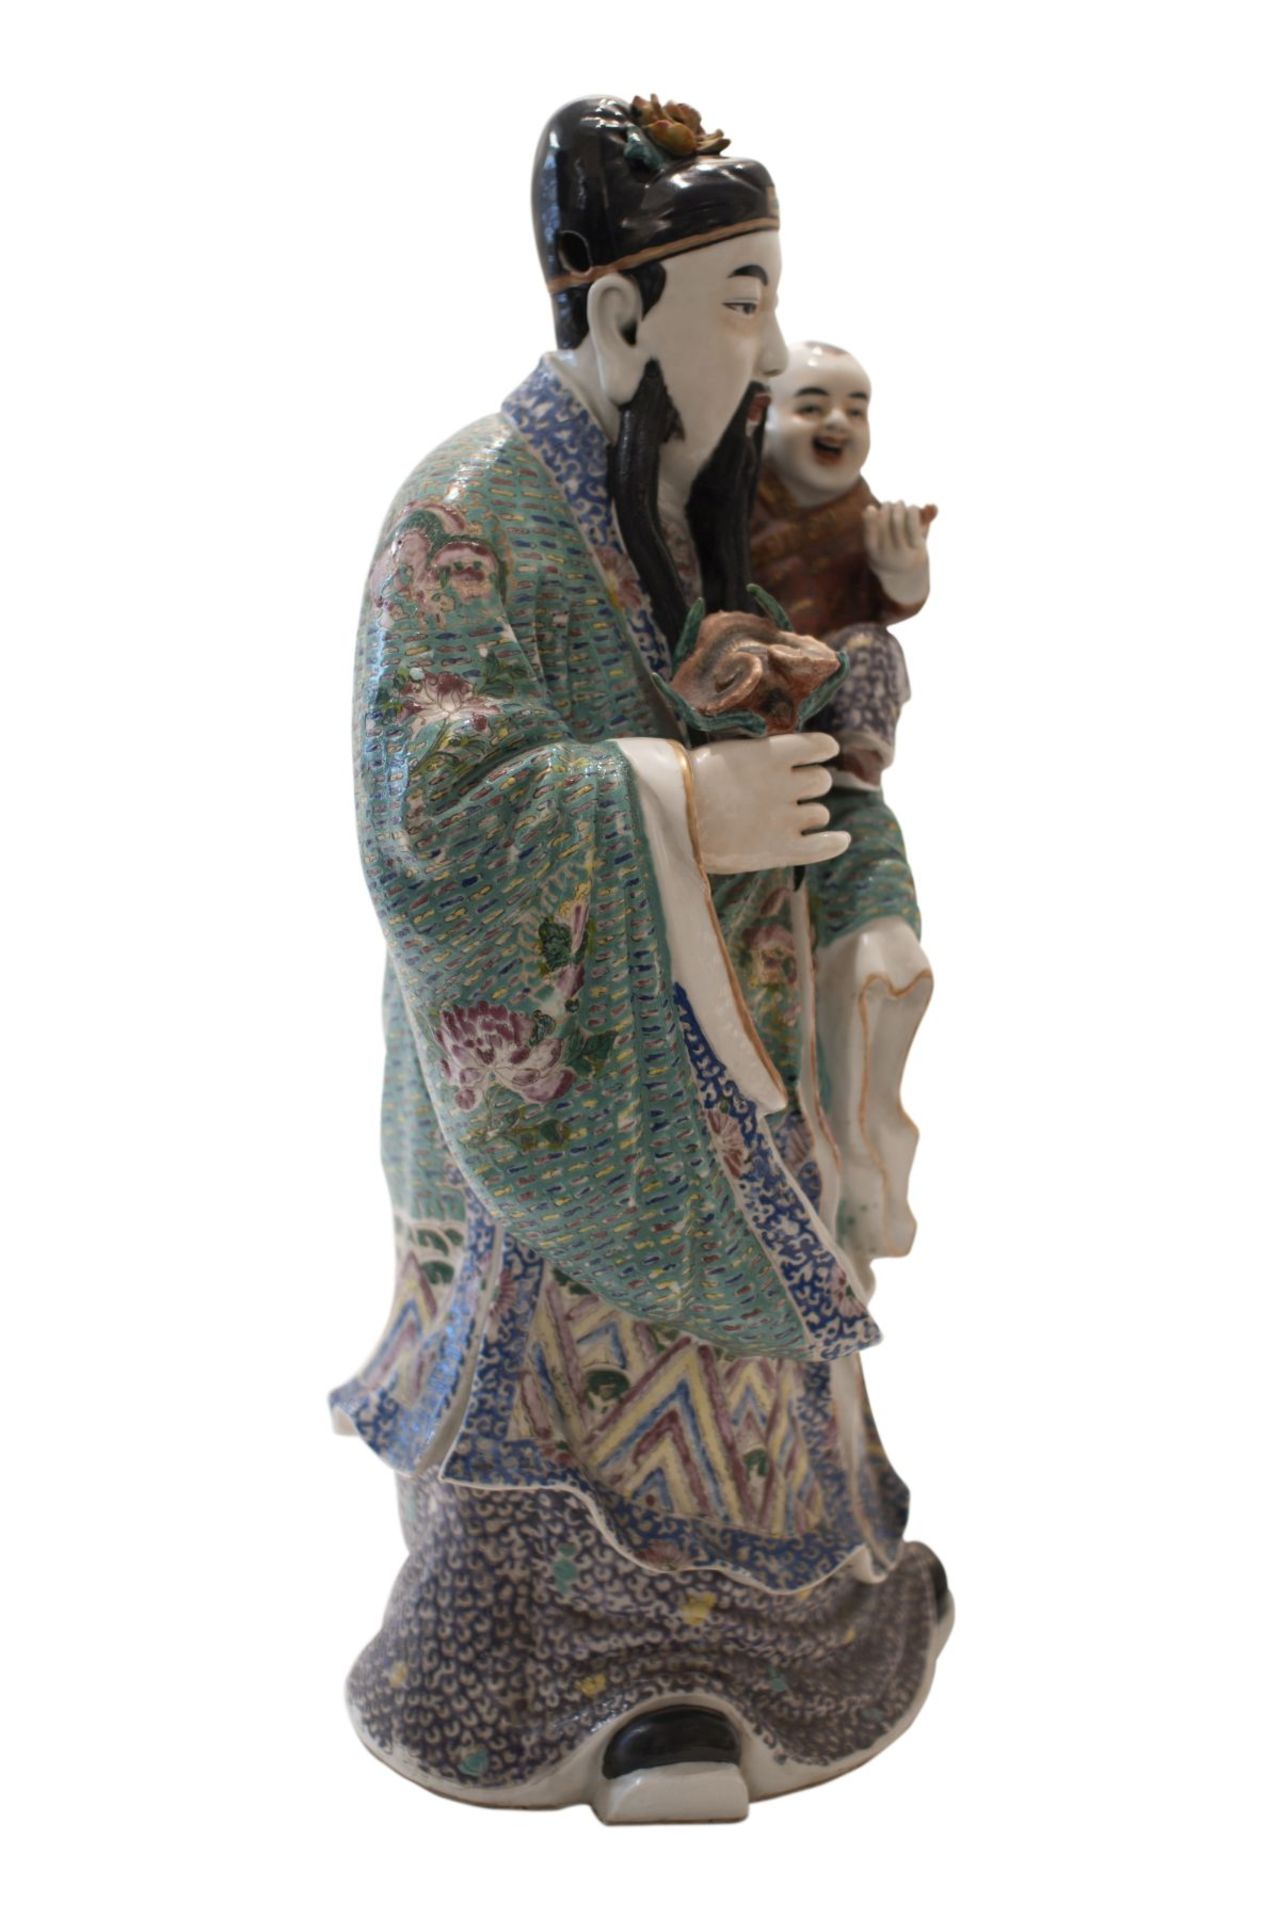 Asian priest with child - Image 8 of 10